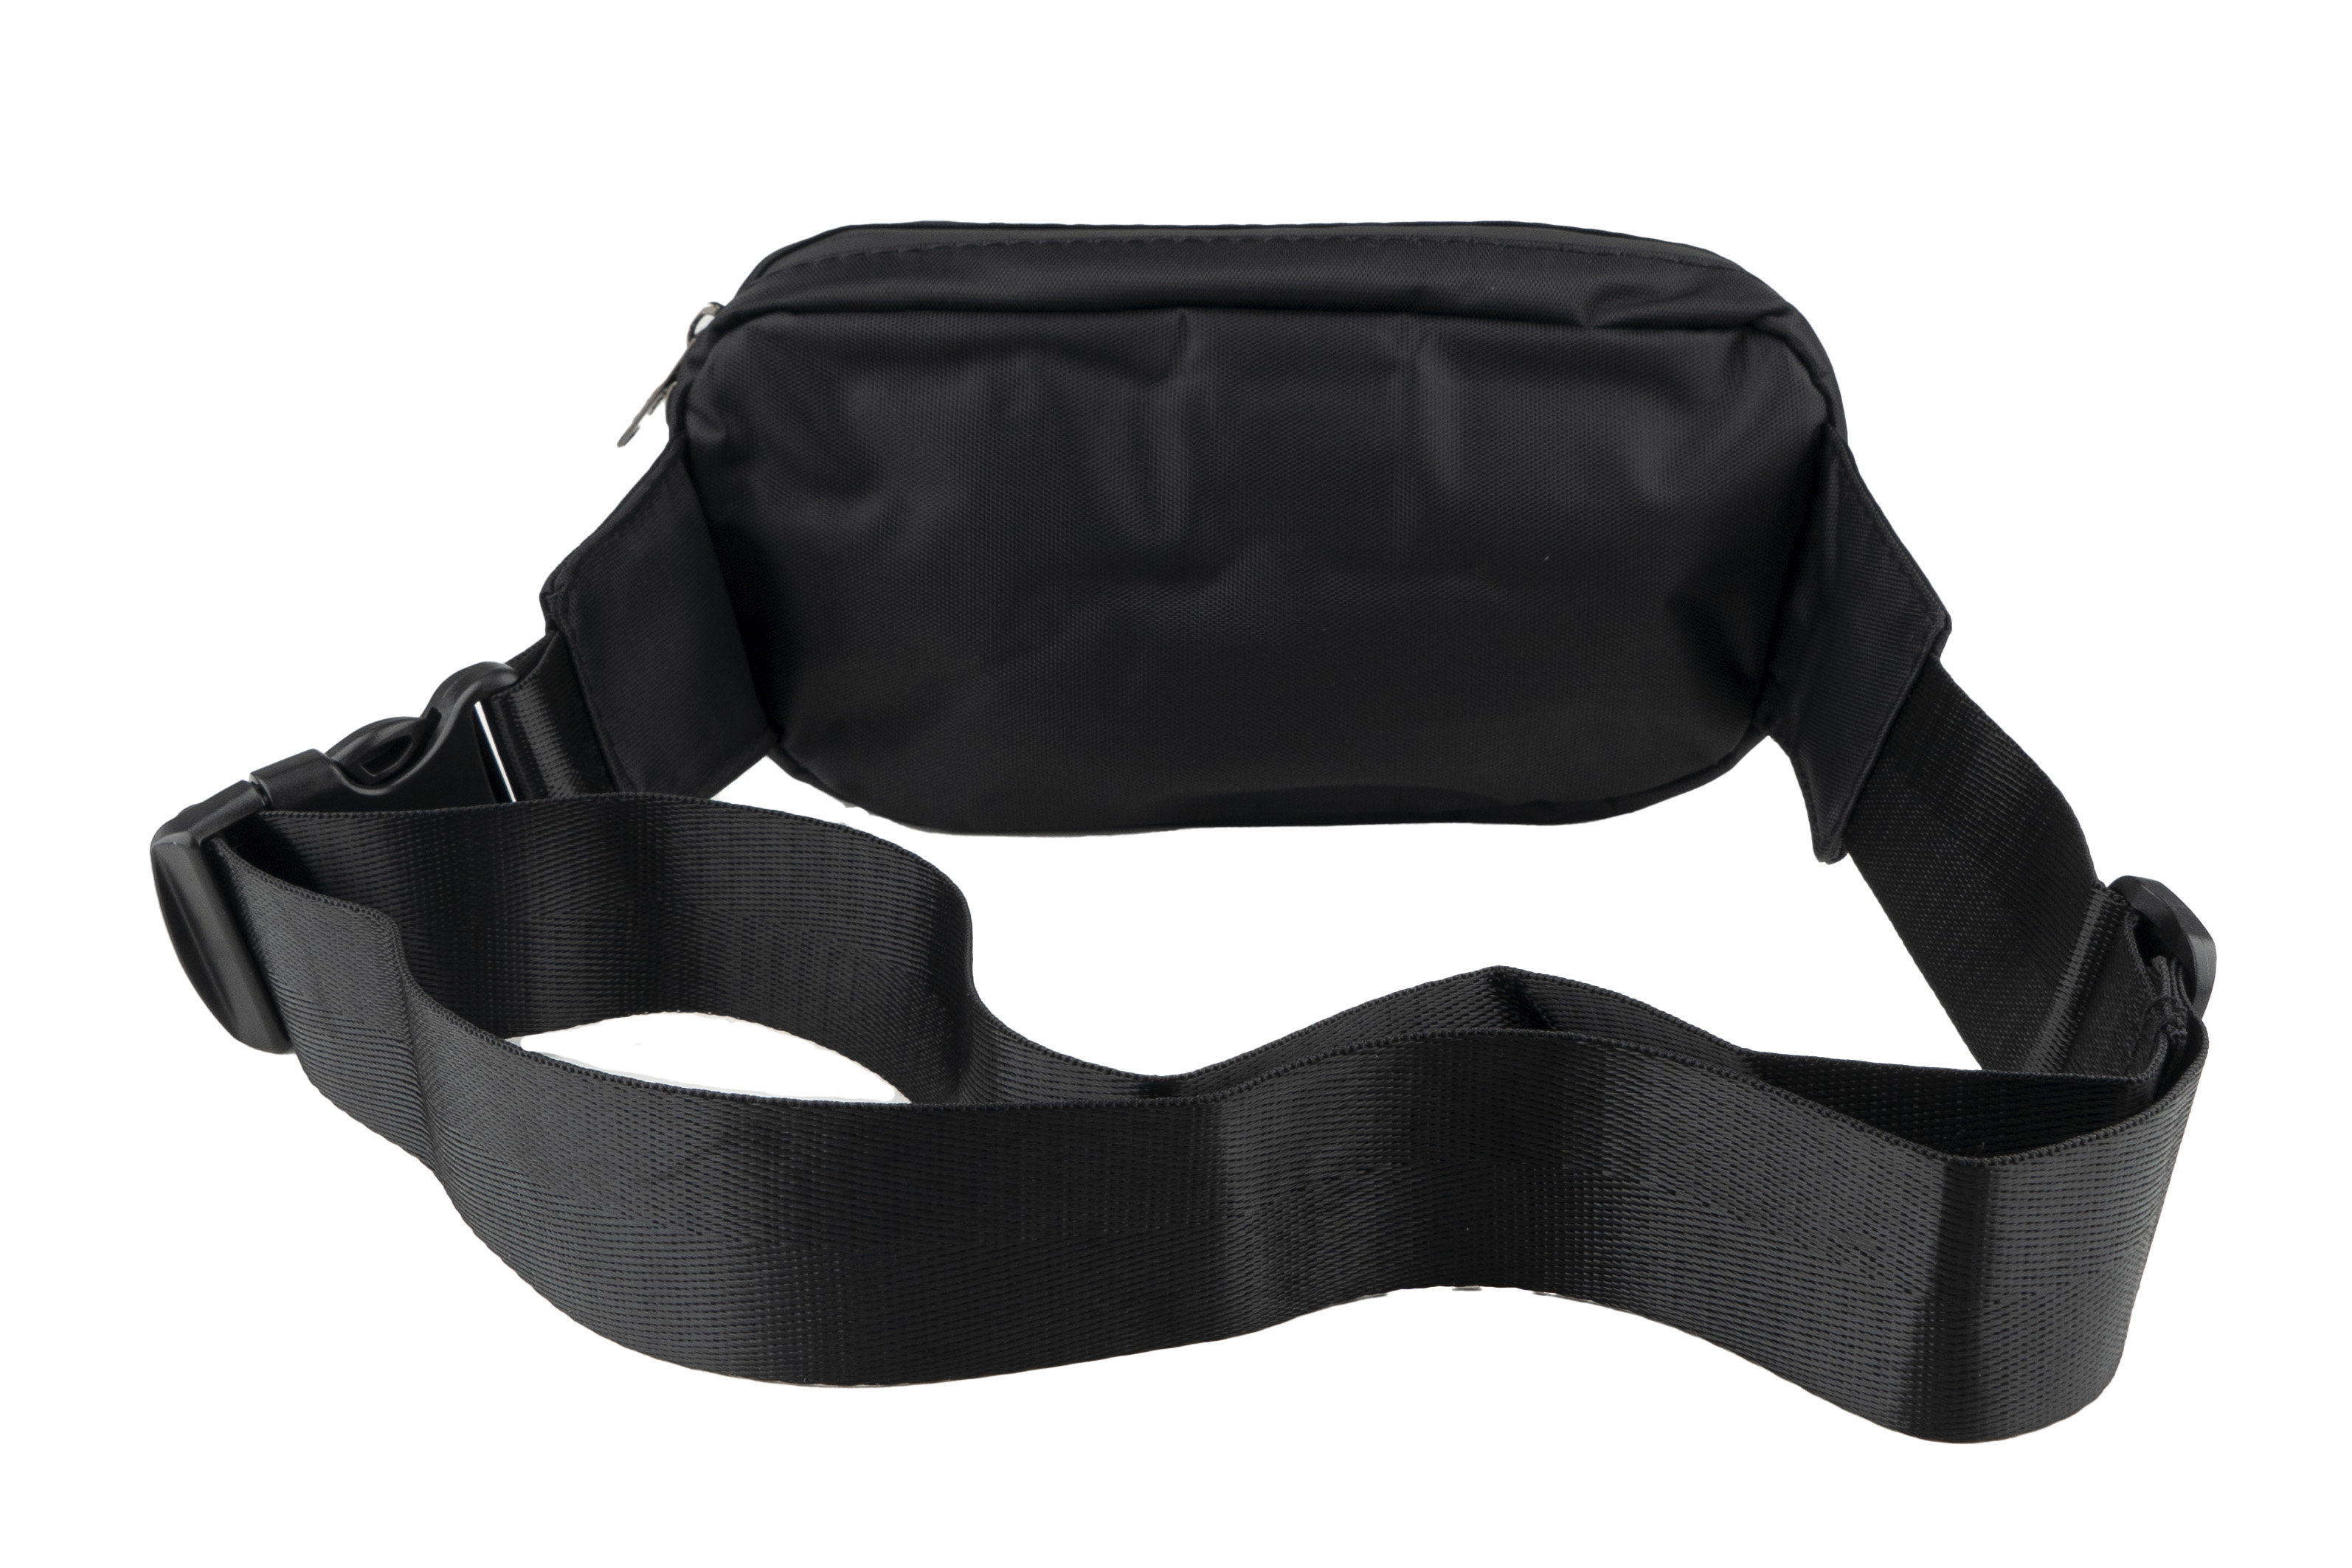 PURIZE® Activated carbon Beltbag